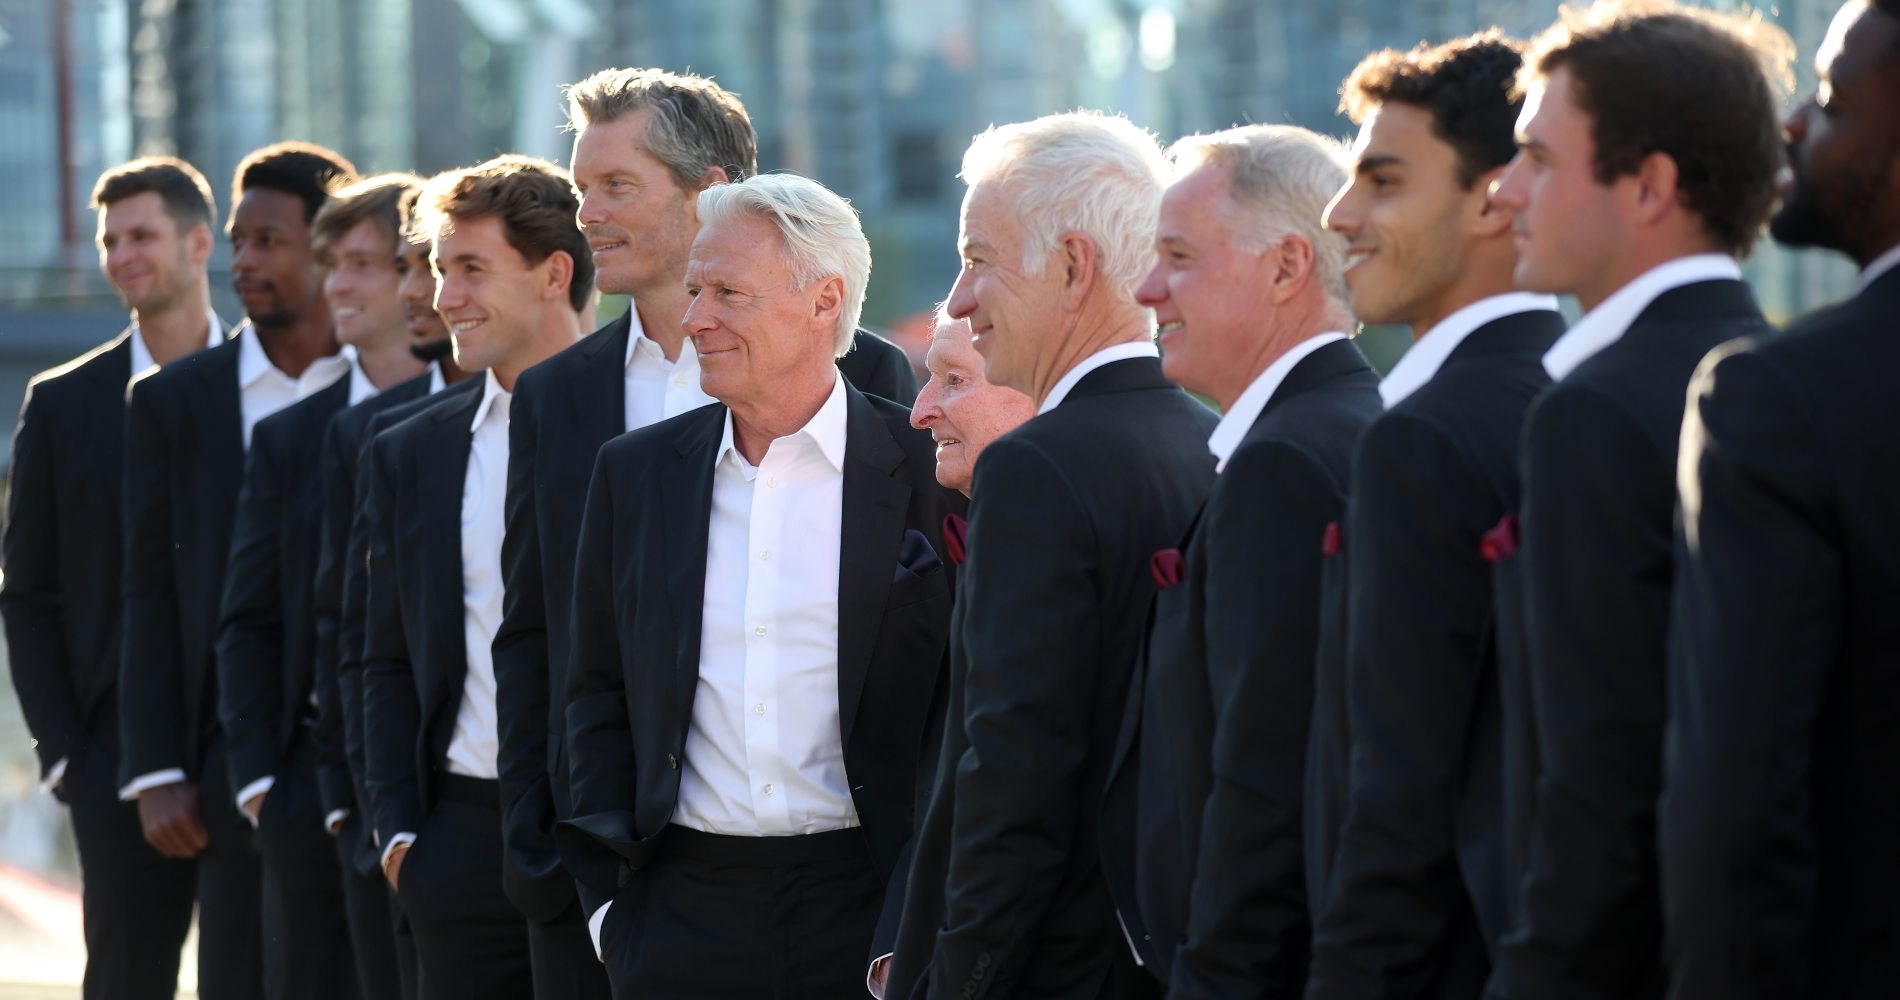 Team Europe and Team World at the 2023 Laver Cup photo shoot (Getty Images/Laver Cup)